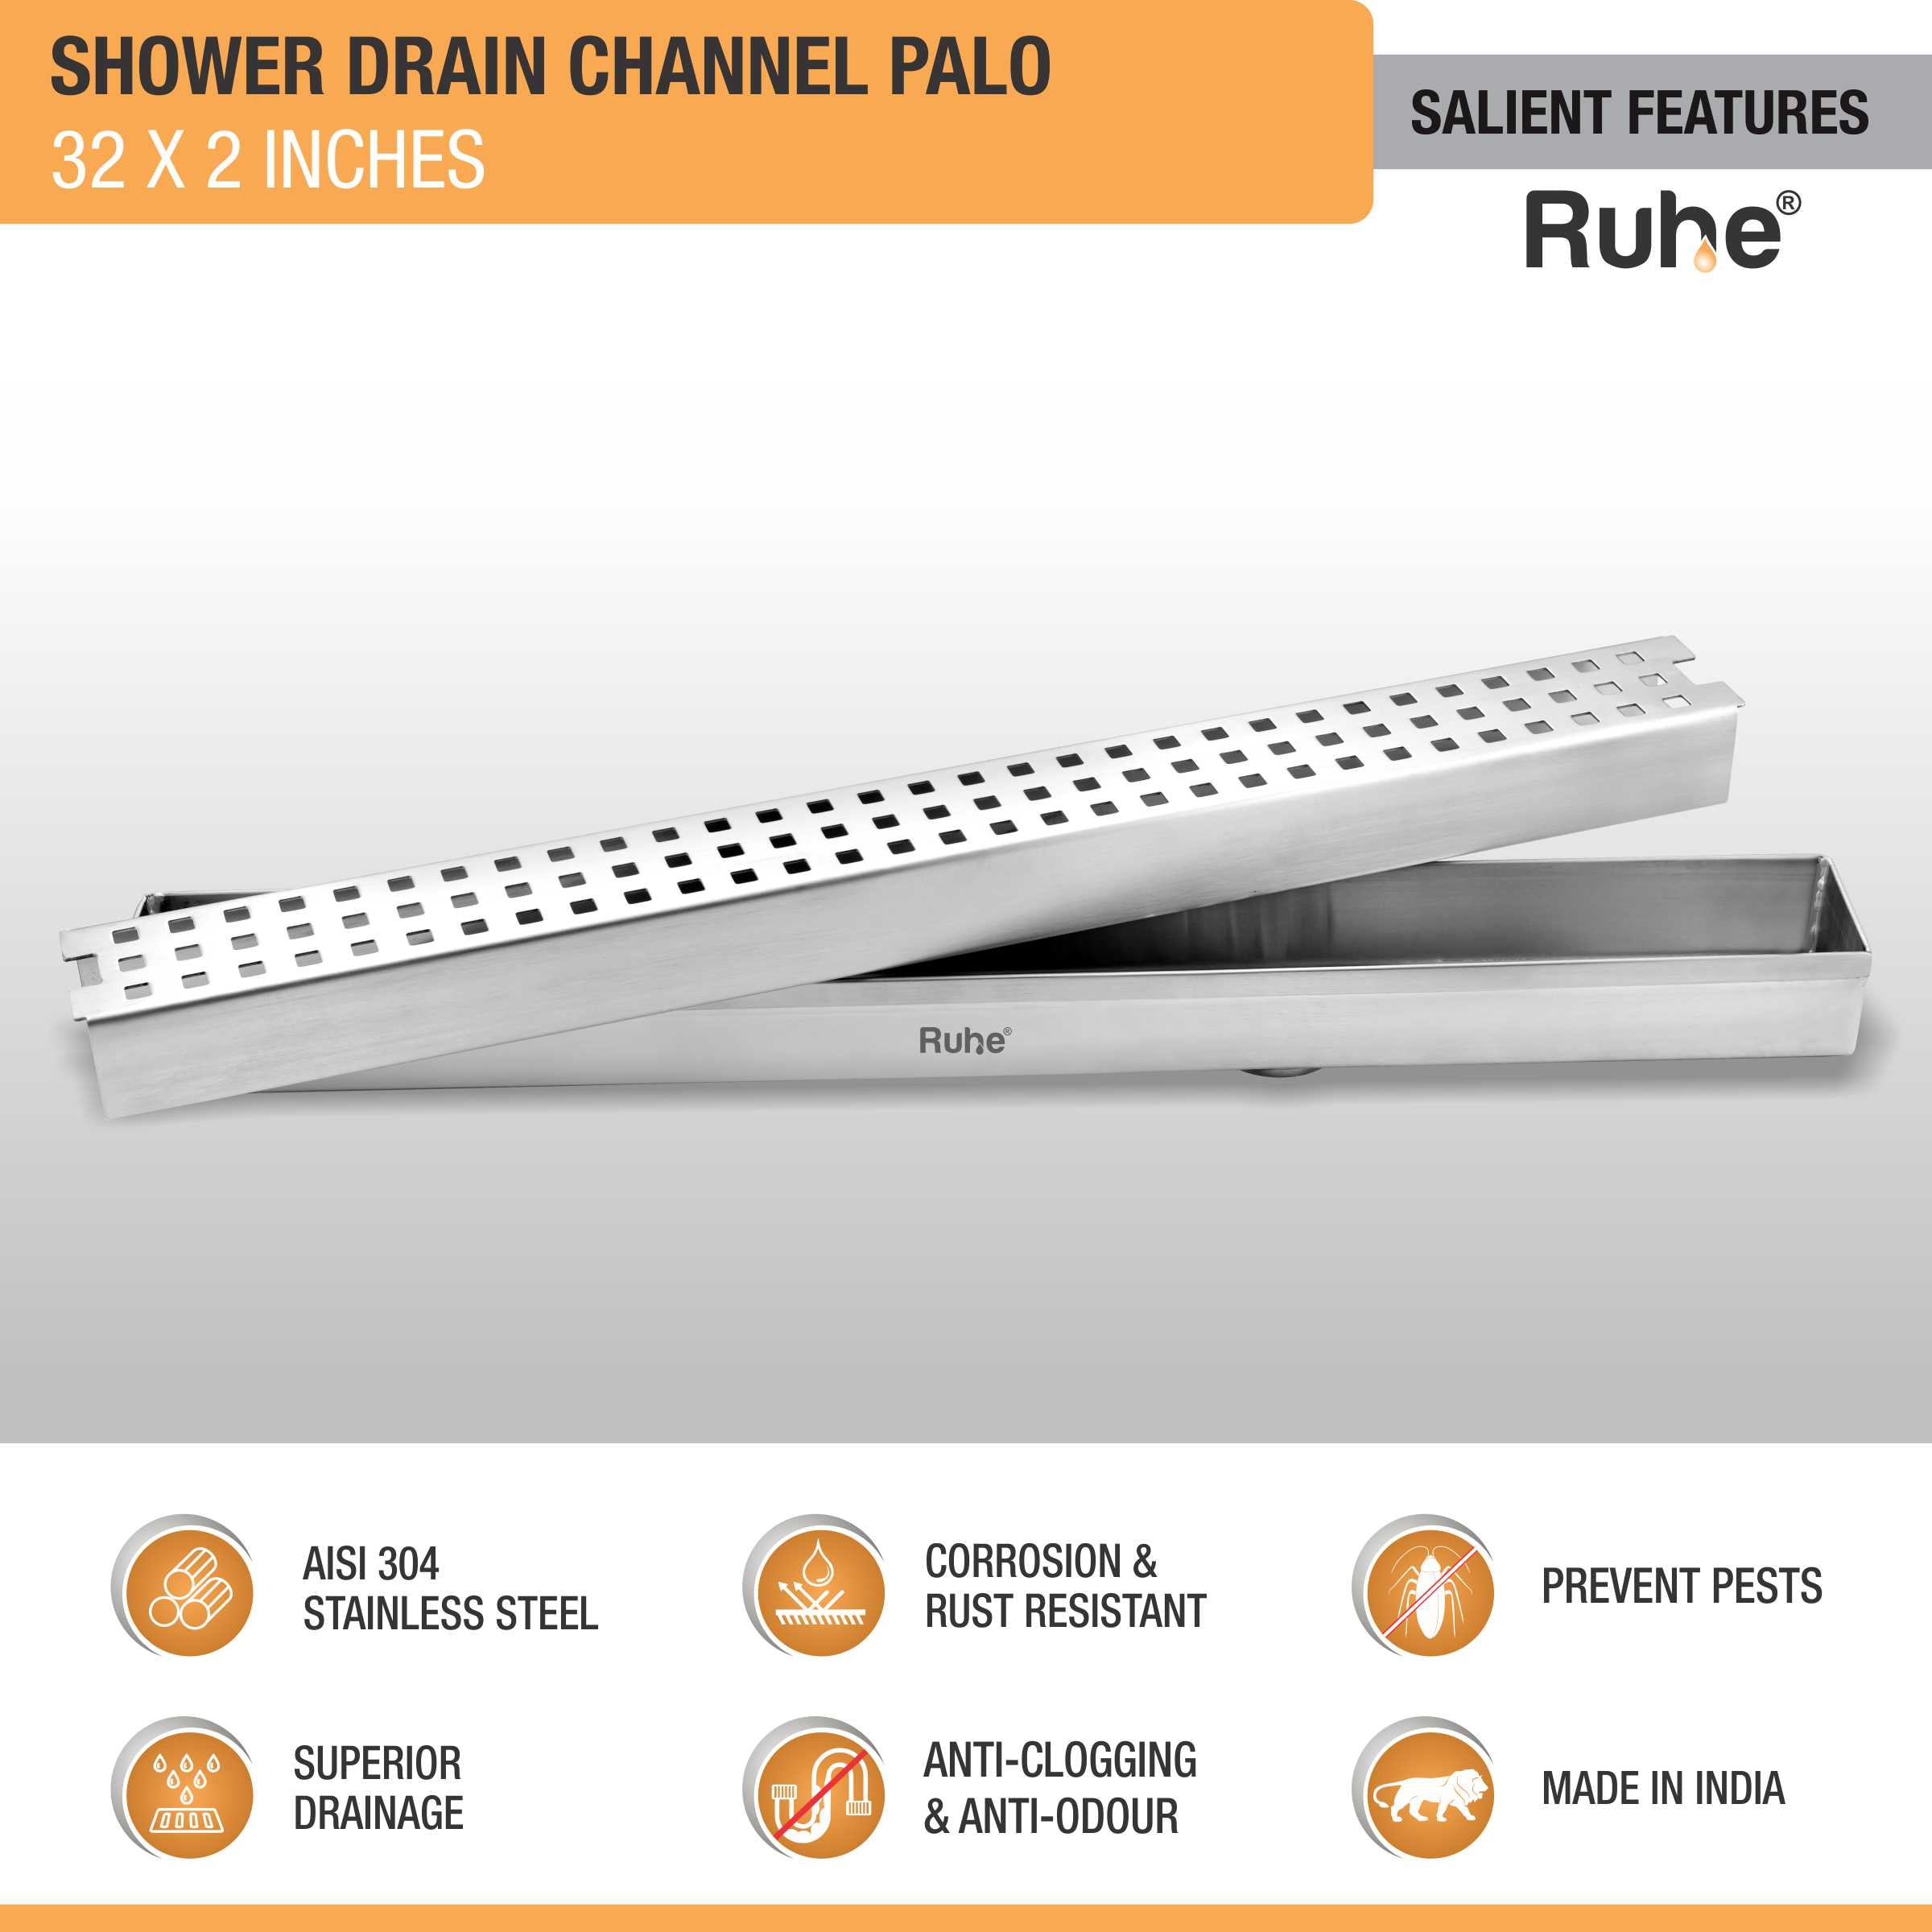 Palo Shower Drain Channel (32 X 2 Inches) (304 Grade) features